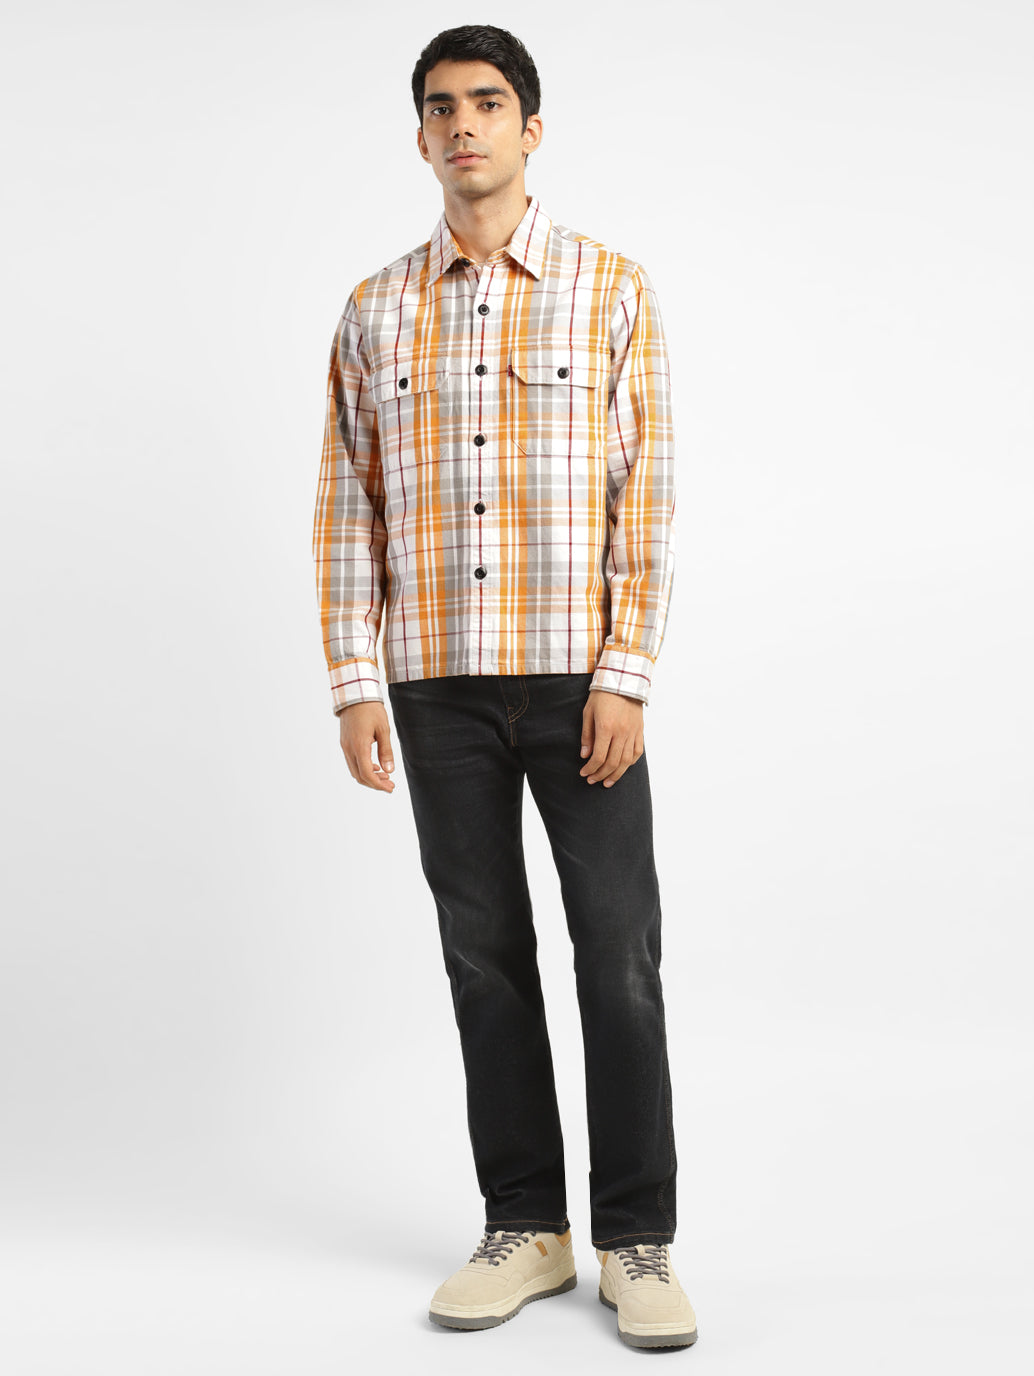 Men's Chekered Relaxed Fit Shirts